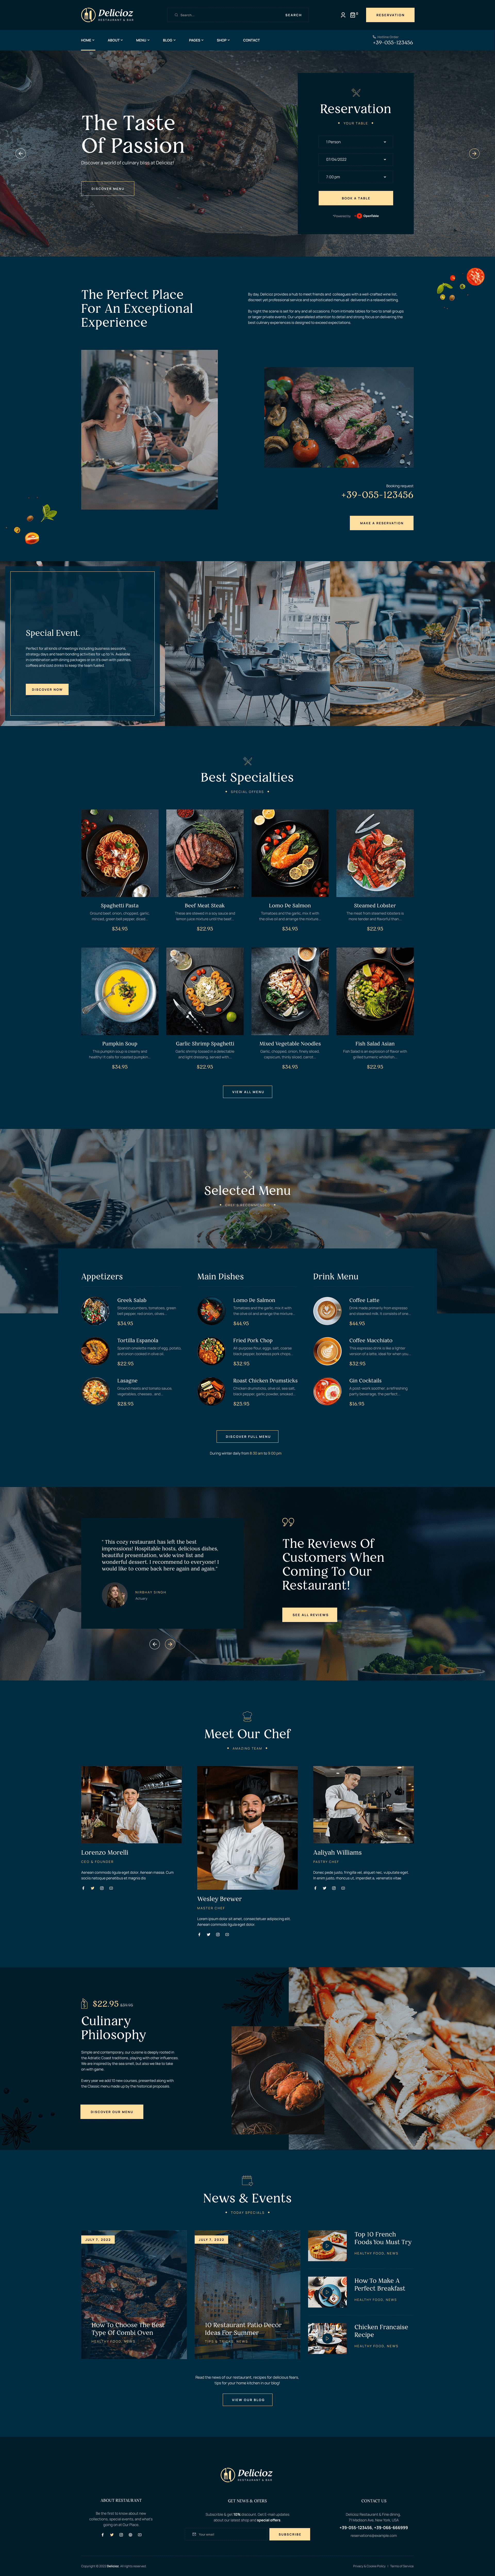 Image page of a beautiful WordPress template on a restaurant theme.